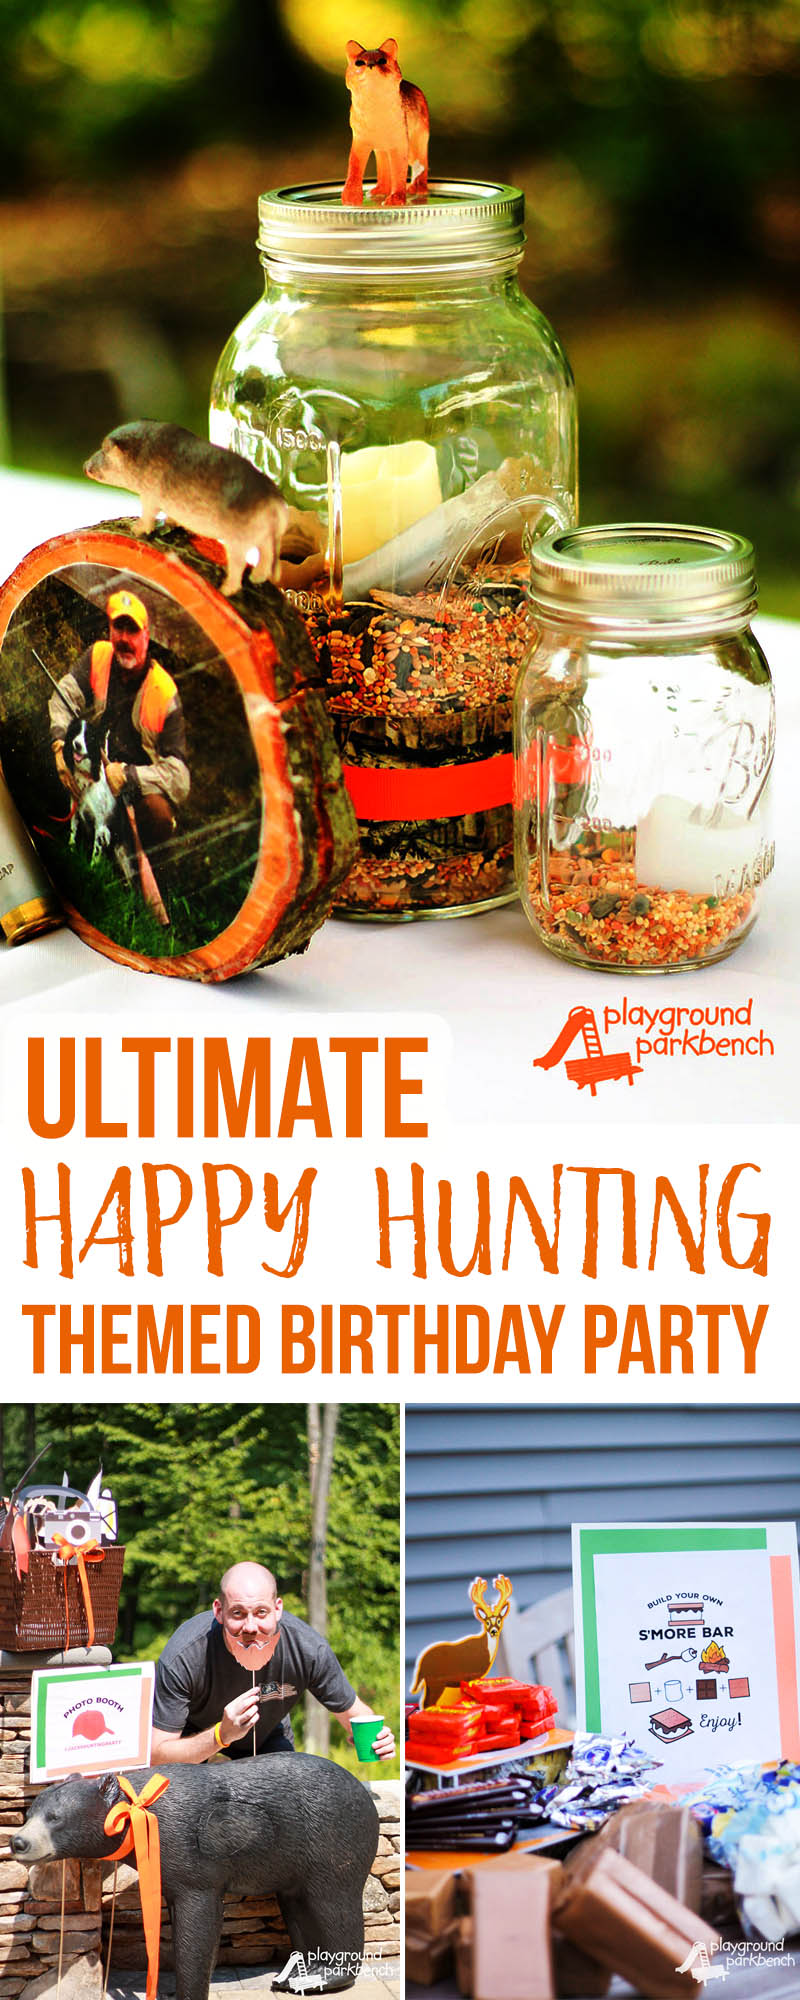 Celebrate the hunter in your life with these fun and easy ideas for a Happy Hunting themed birthday party! We celebrated my father in law with a 70th Surprise Birthday Party, featuring hunting themed party centerpieces, decor, photo booth props, s'mores bar and more! See all the fun hunting party ideas and supplies... | Hunting Party | Birthday Party | Party Ideas | 70th Birthday | Boy Birthday | Birthday Party Themes | Themed Birthday Party